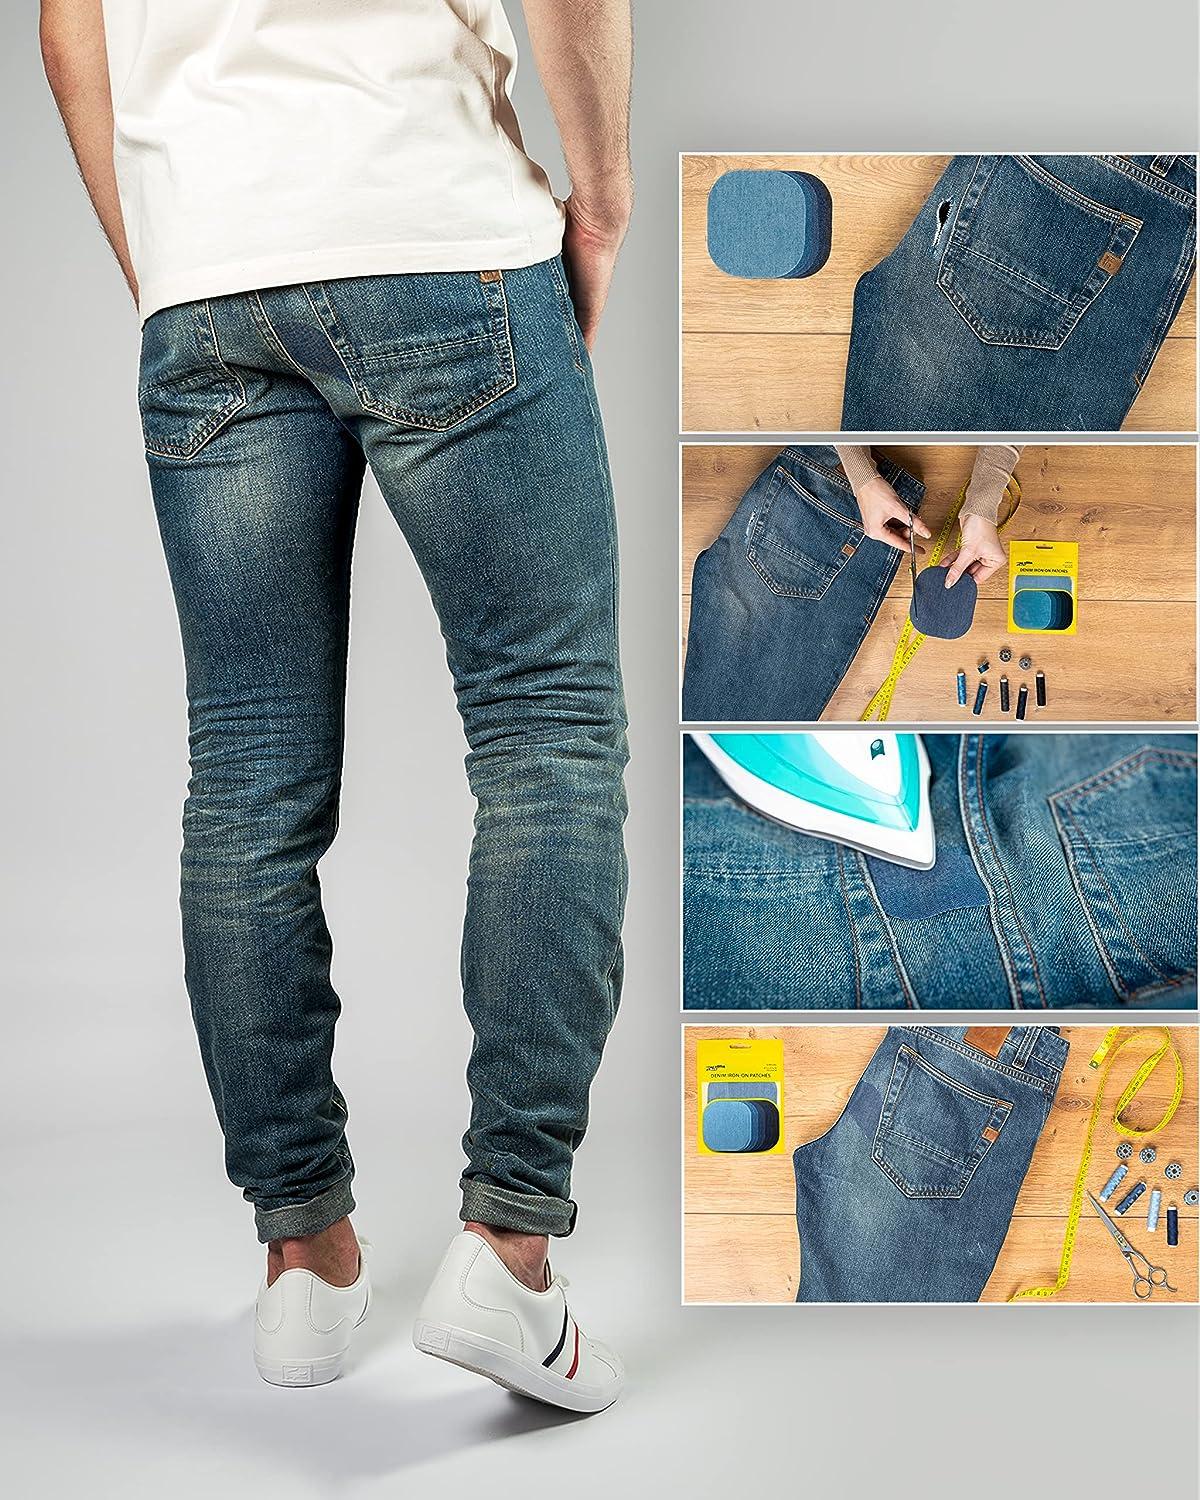 9 Kinds of Shapes Iron on Patches Denim Jean Repair Patches Clothing Repair  Patch Kit for